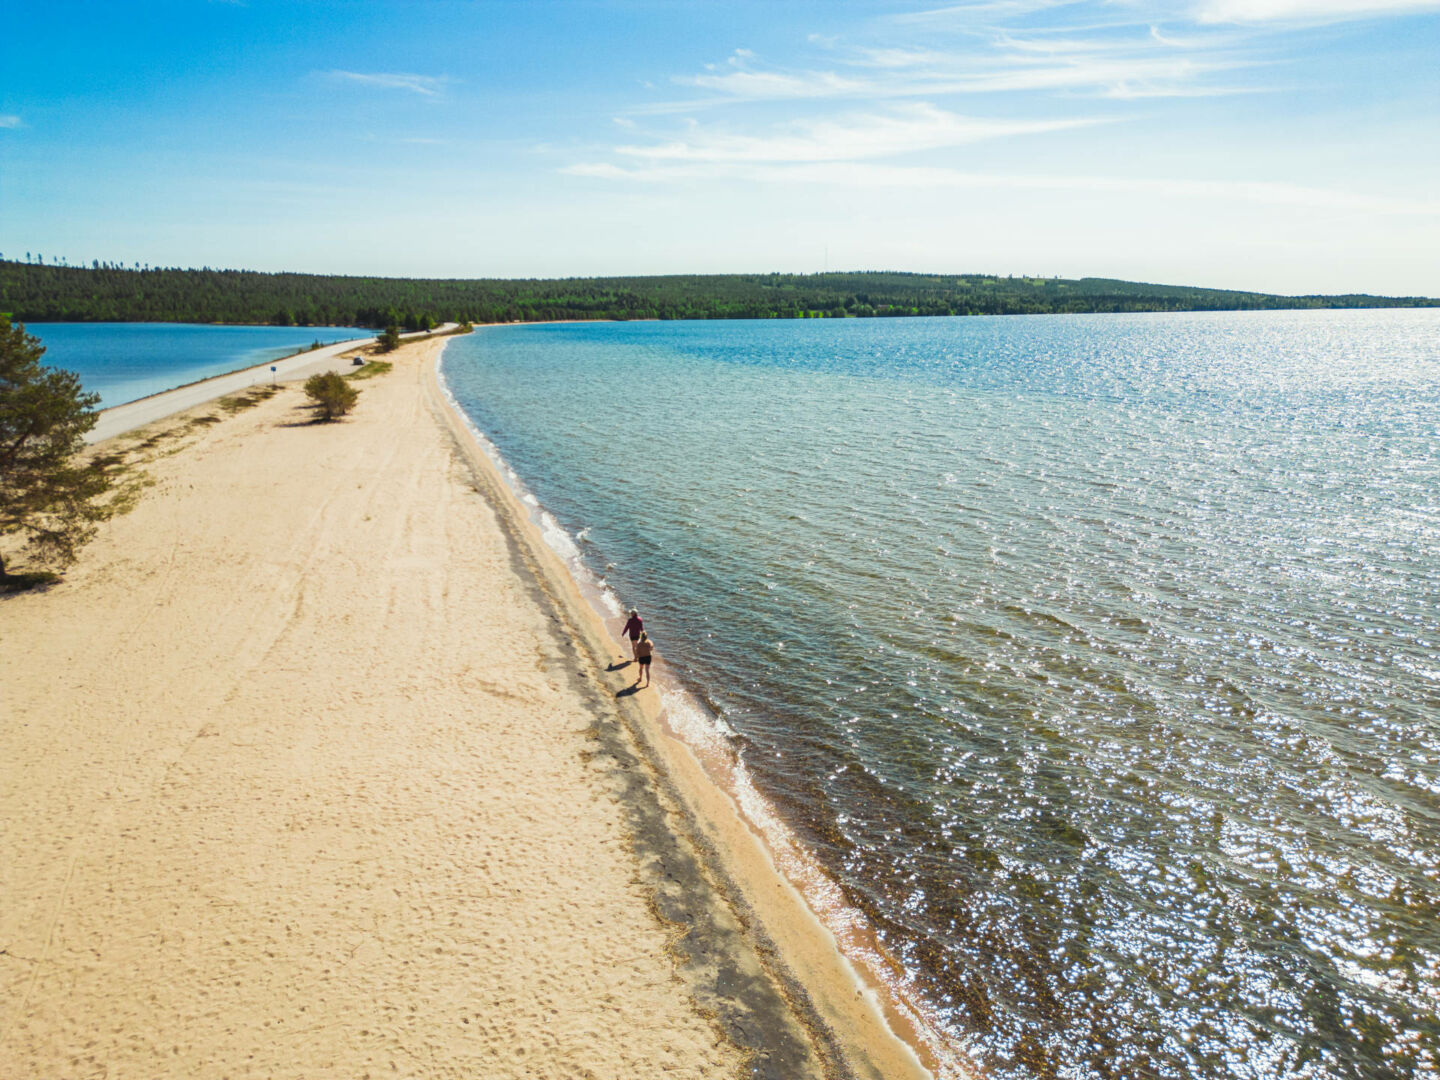 The sandy beaches of Posio, a Finnish Lapland filming location